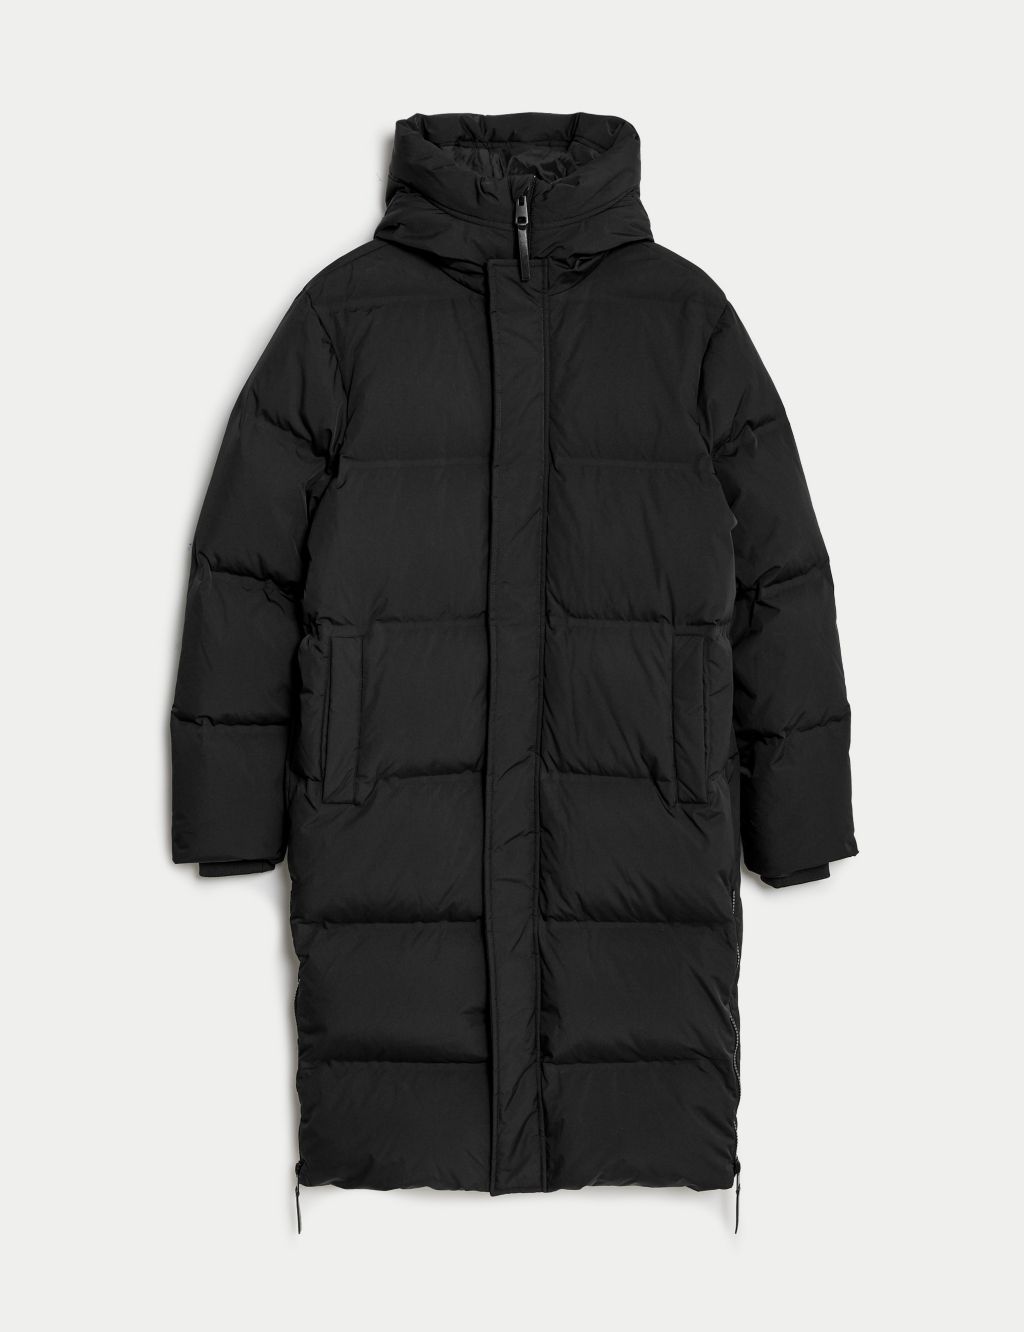 Feather and Down Puffer Jacket with Stormwear™ image 2